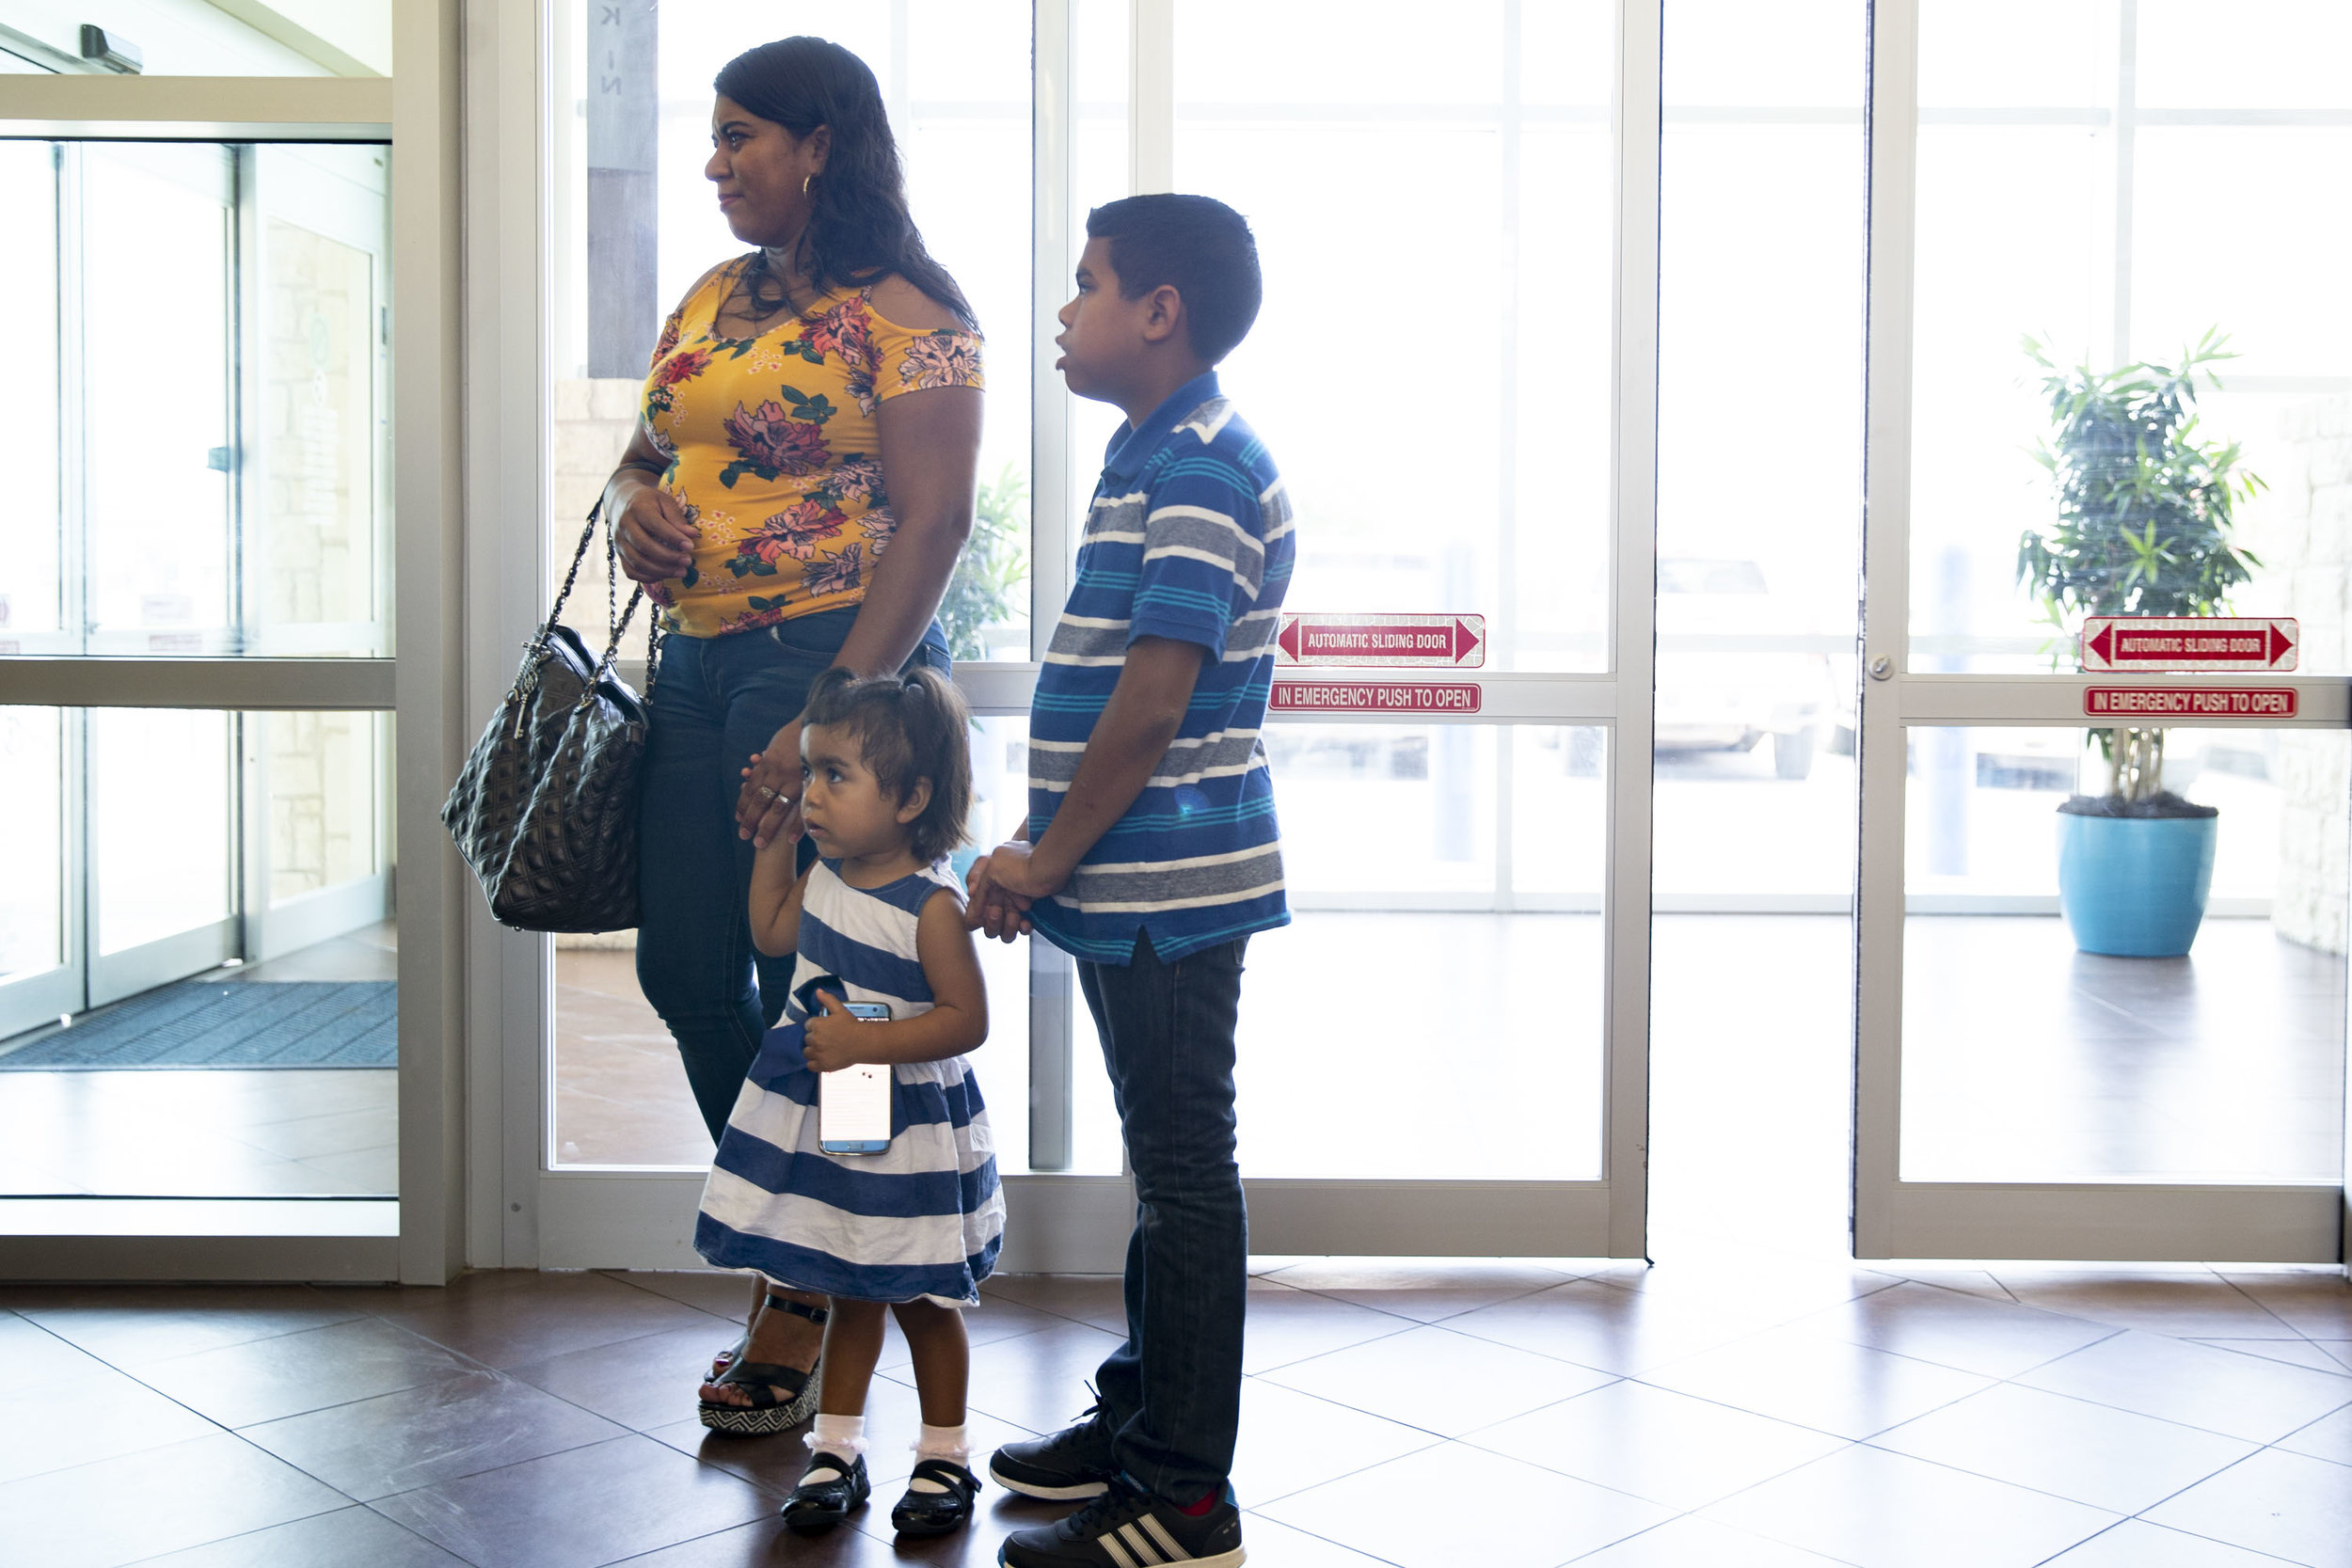  Lizeth Rosales, an asylum recipient from Honduras, stands in a health facility with her two children, David, 11, and Kelly, 2, in Kyle, Texas, on Friday, June 22, 2018. 